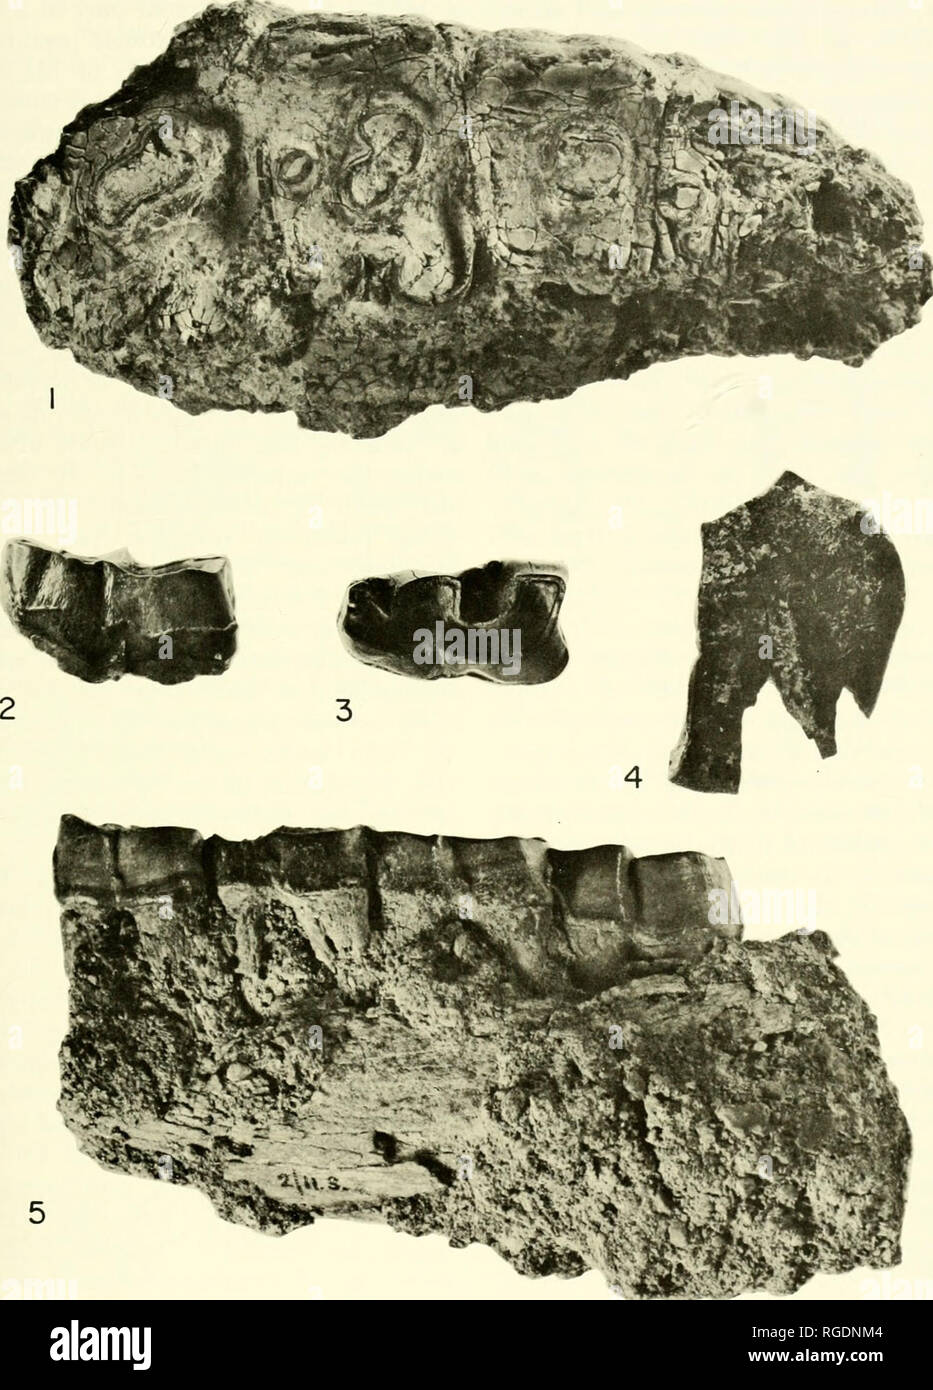 . Bulletin of the Museum of Comparative Zoology at Harvard College. Zoology. Rhinoceros from the Miocene of Kenya • Hooijer 363. late 11. Chilotheridium paftersoni. Fig. 1, right maxillary wifh dm', P&quot;-M' (2 13.S), crown view, X 0.75. Fig. 4, RM&quot;, losterior portion of ectoloph (2/13.5), outer view, X 0.60. 6rachypofher/um sp. Figs. 2-3, L dm:; (2/2.S), outer and crown iews, X 0.67. Acerafher/um c. q. Dicerorhinus sp. Fig. 5, left ramus with Pi-M.i (2,'ll.S), outer view, X 0.55. All from Jgorora, Kenya.. Please note that these images are extracted from scanned page images that may hav Stock Photo